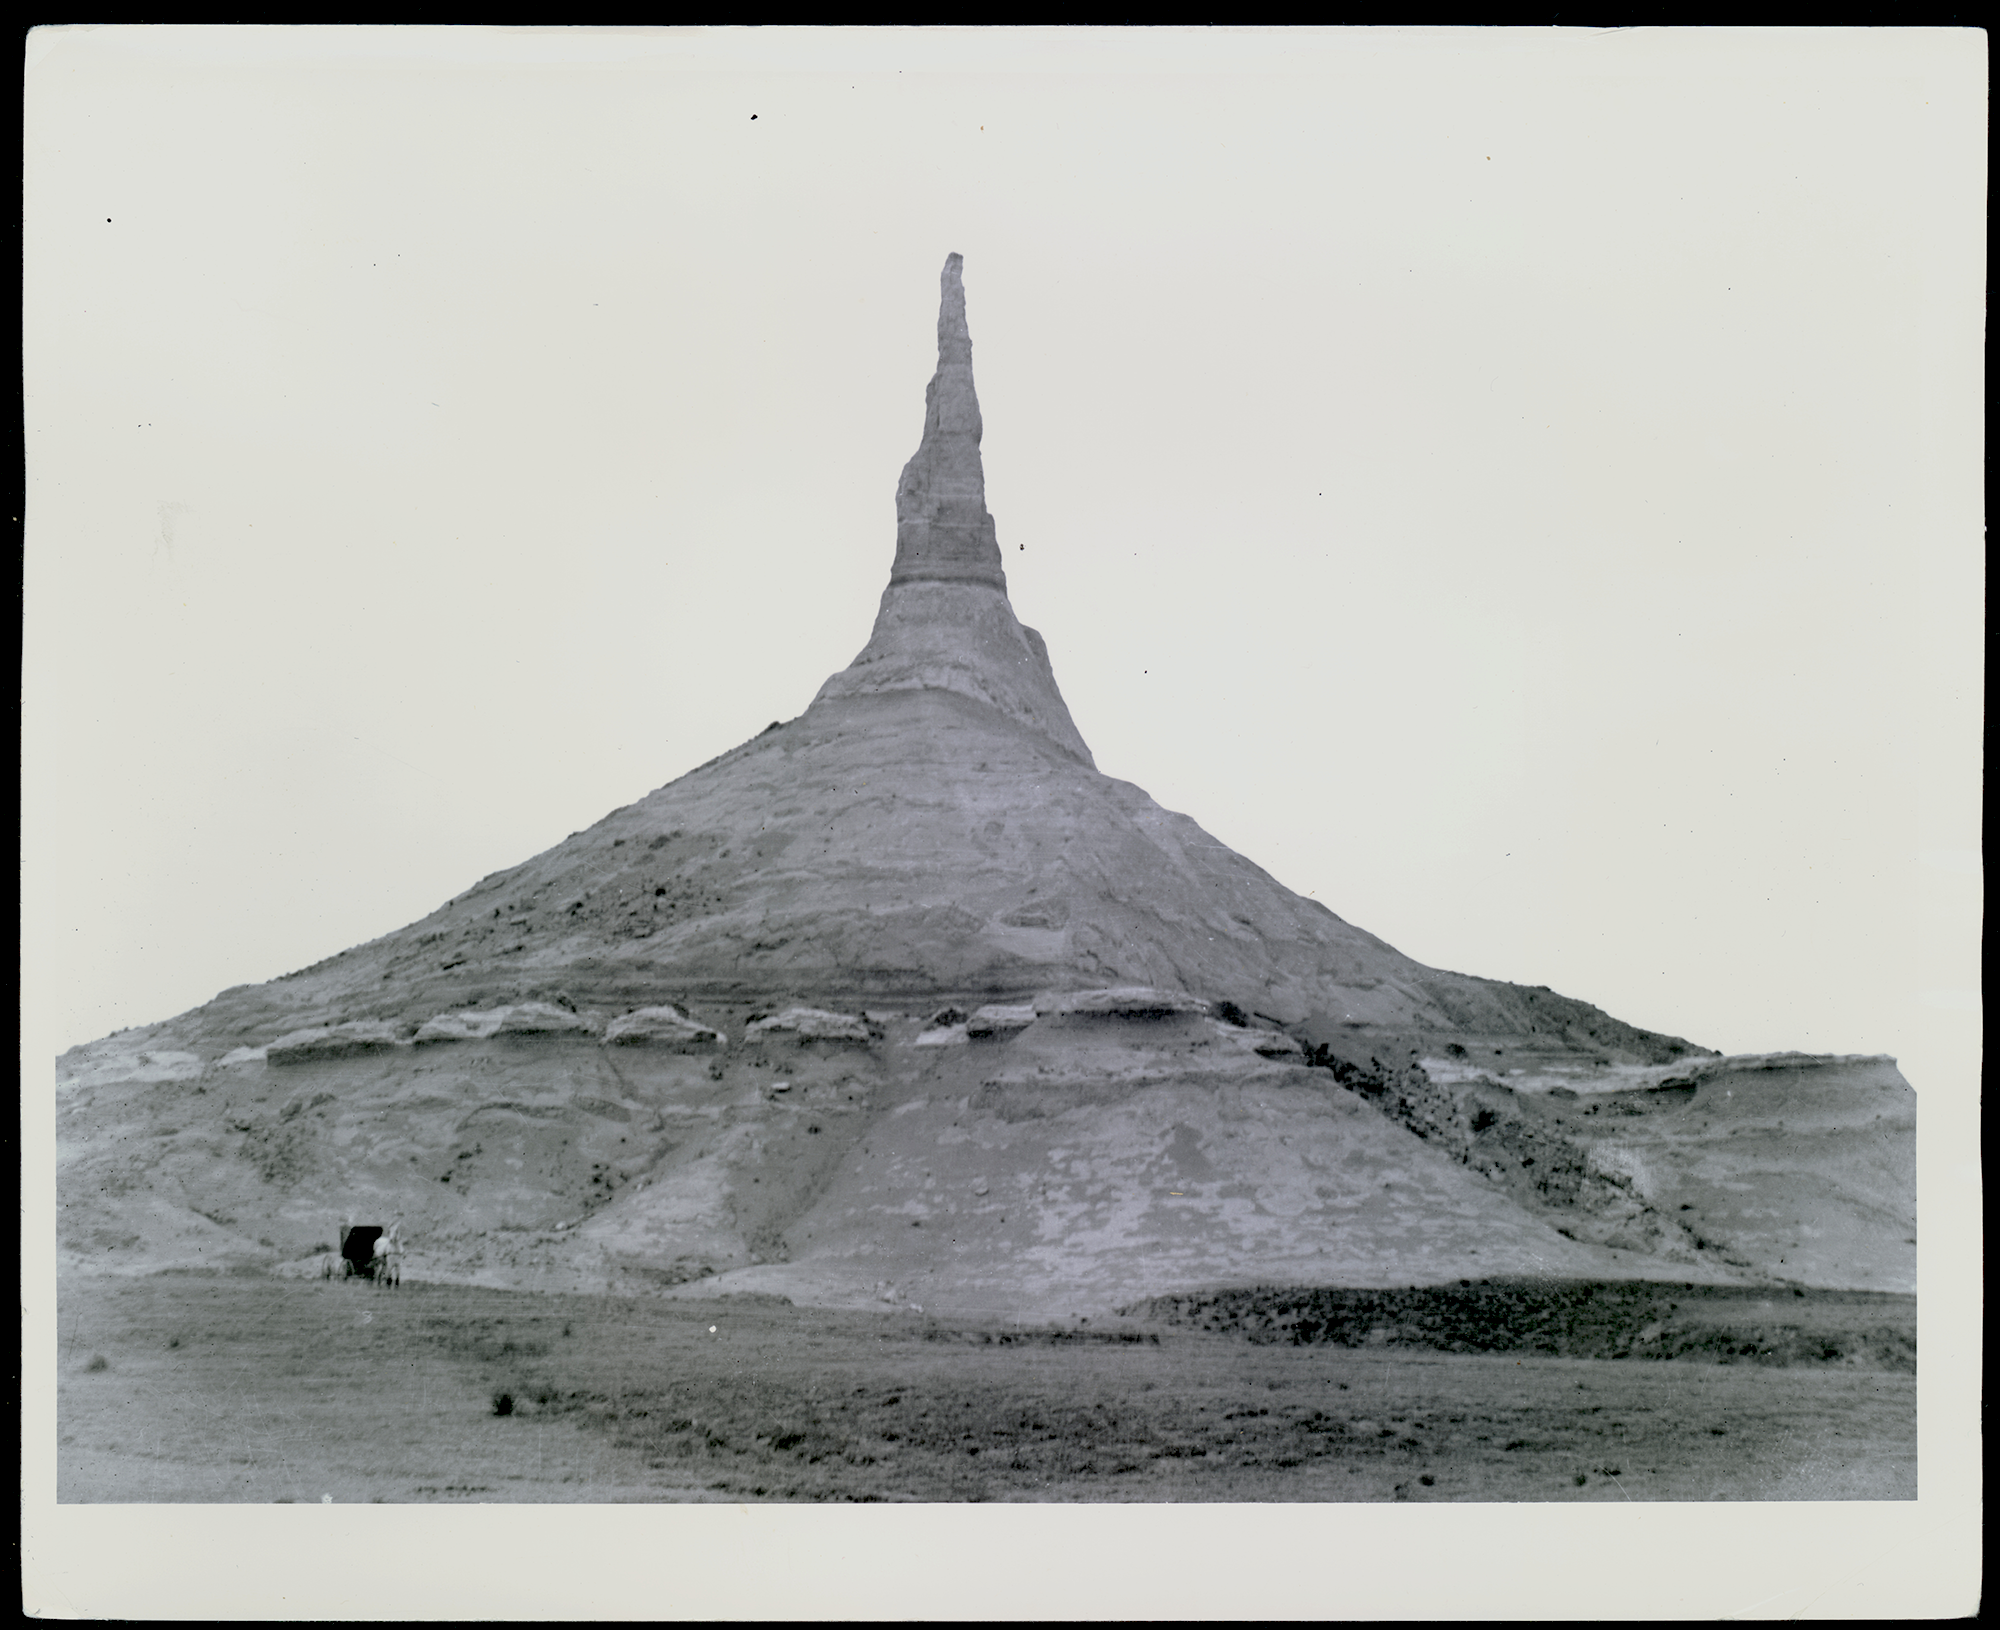 Chimney Rock in the early 1900s.